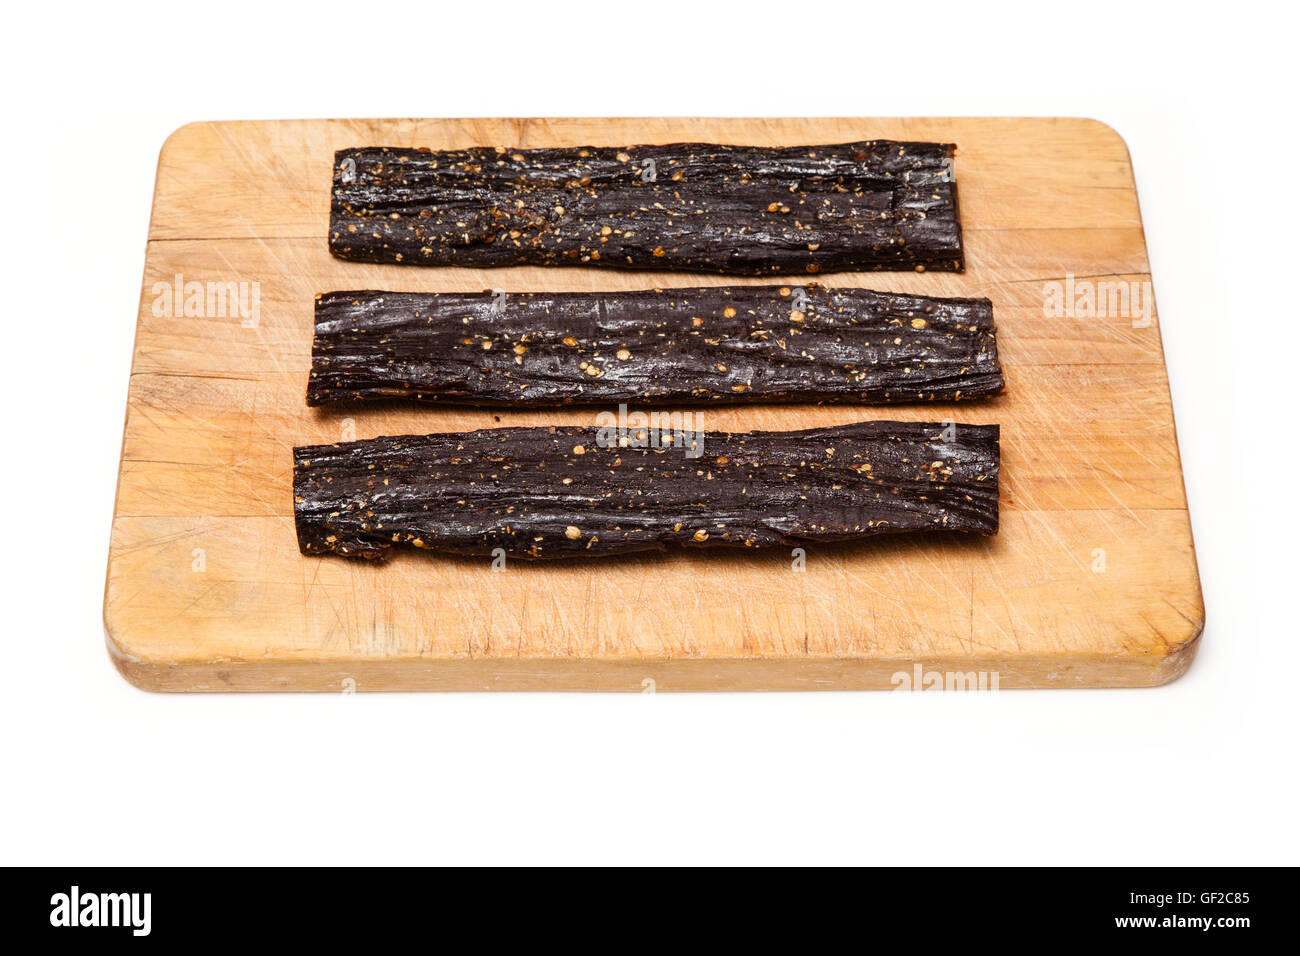 Beef Biltong , South African beef jerky on a wooden chopping board. Stock Photo